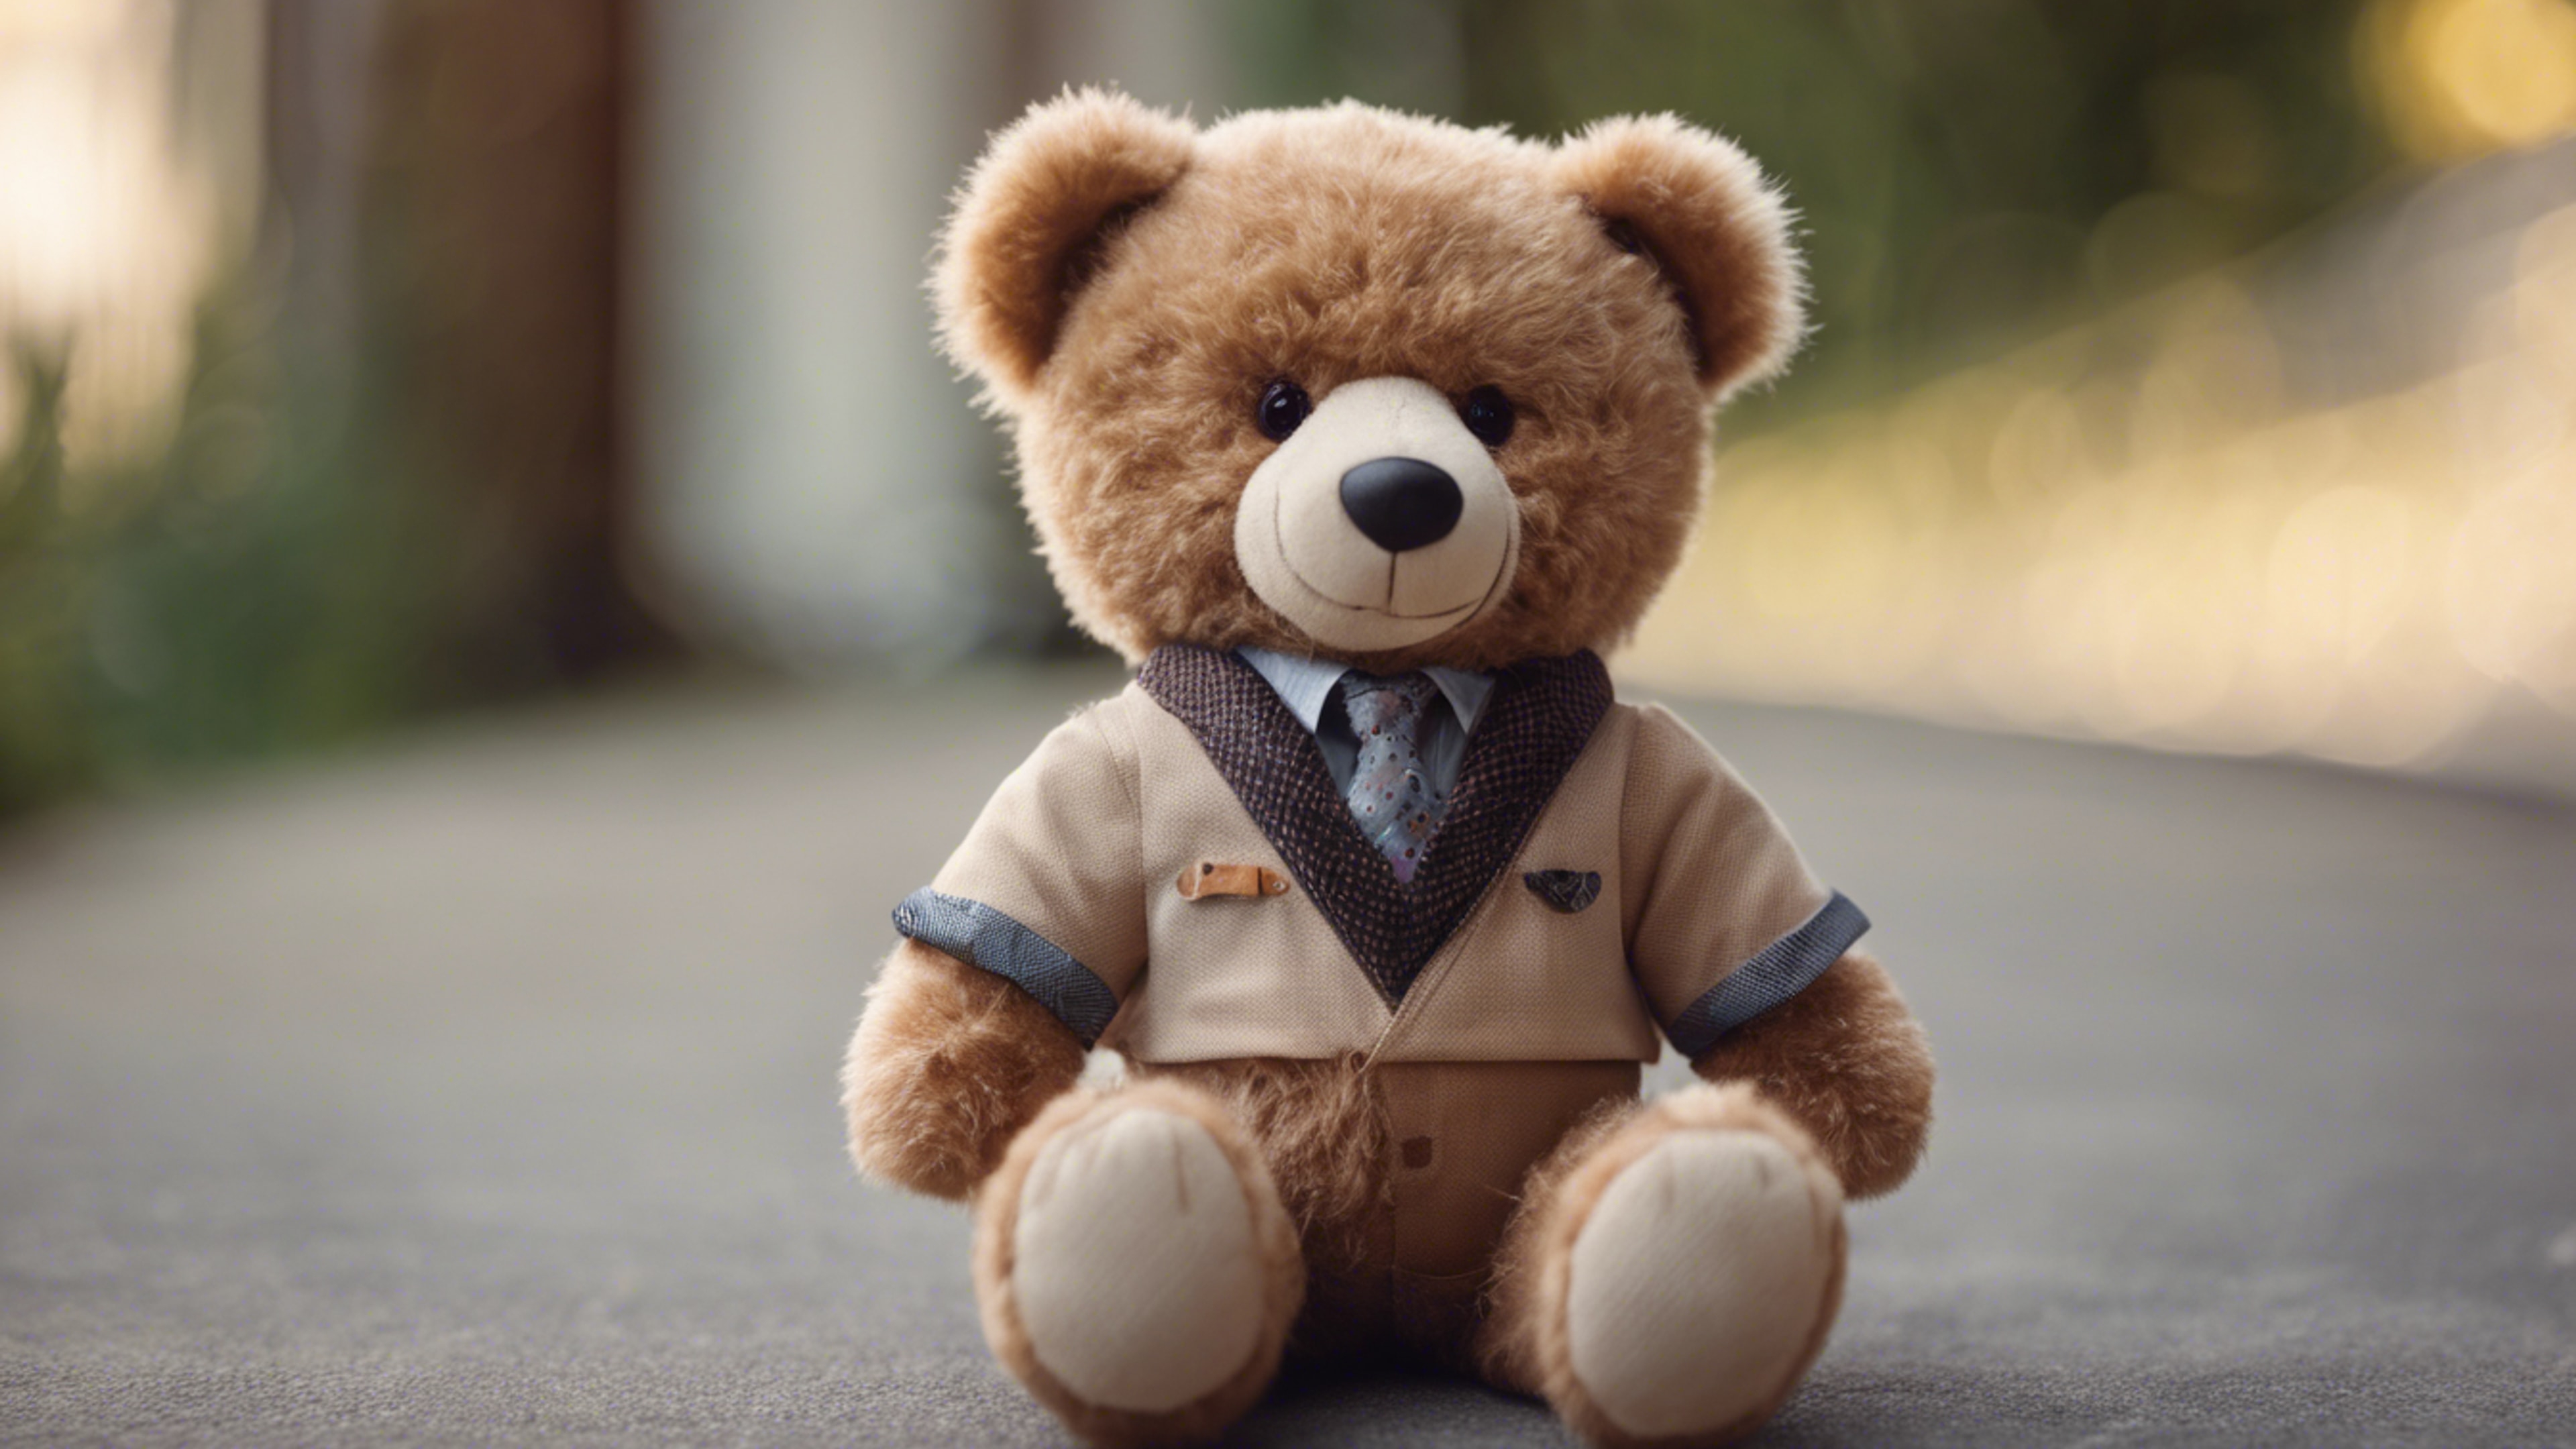 A teddy bear with light brown fur wearing a preppy outfit. טפט[c4dfc3c378844a52a1e6]